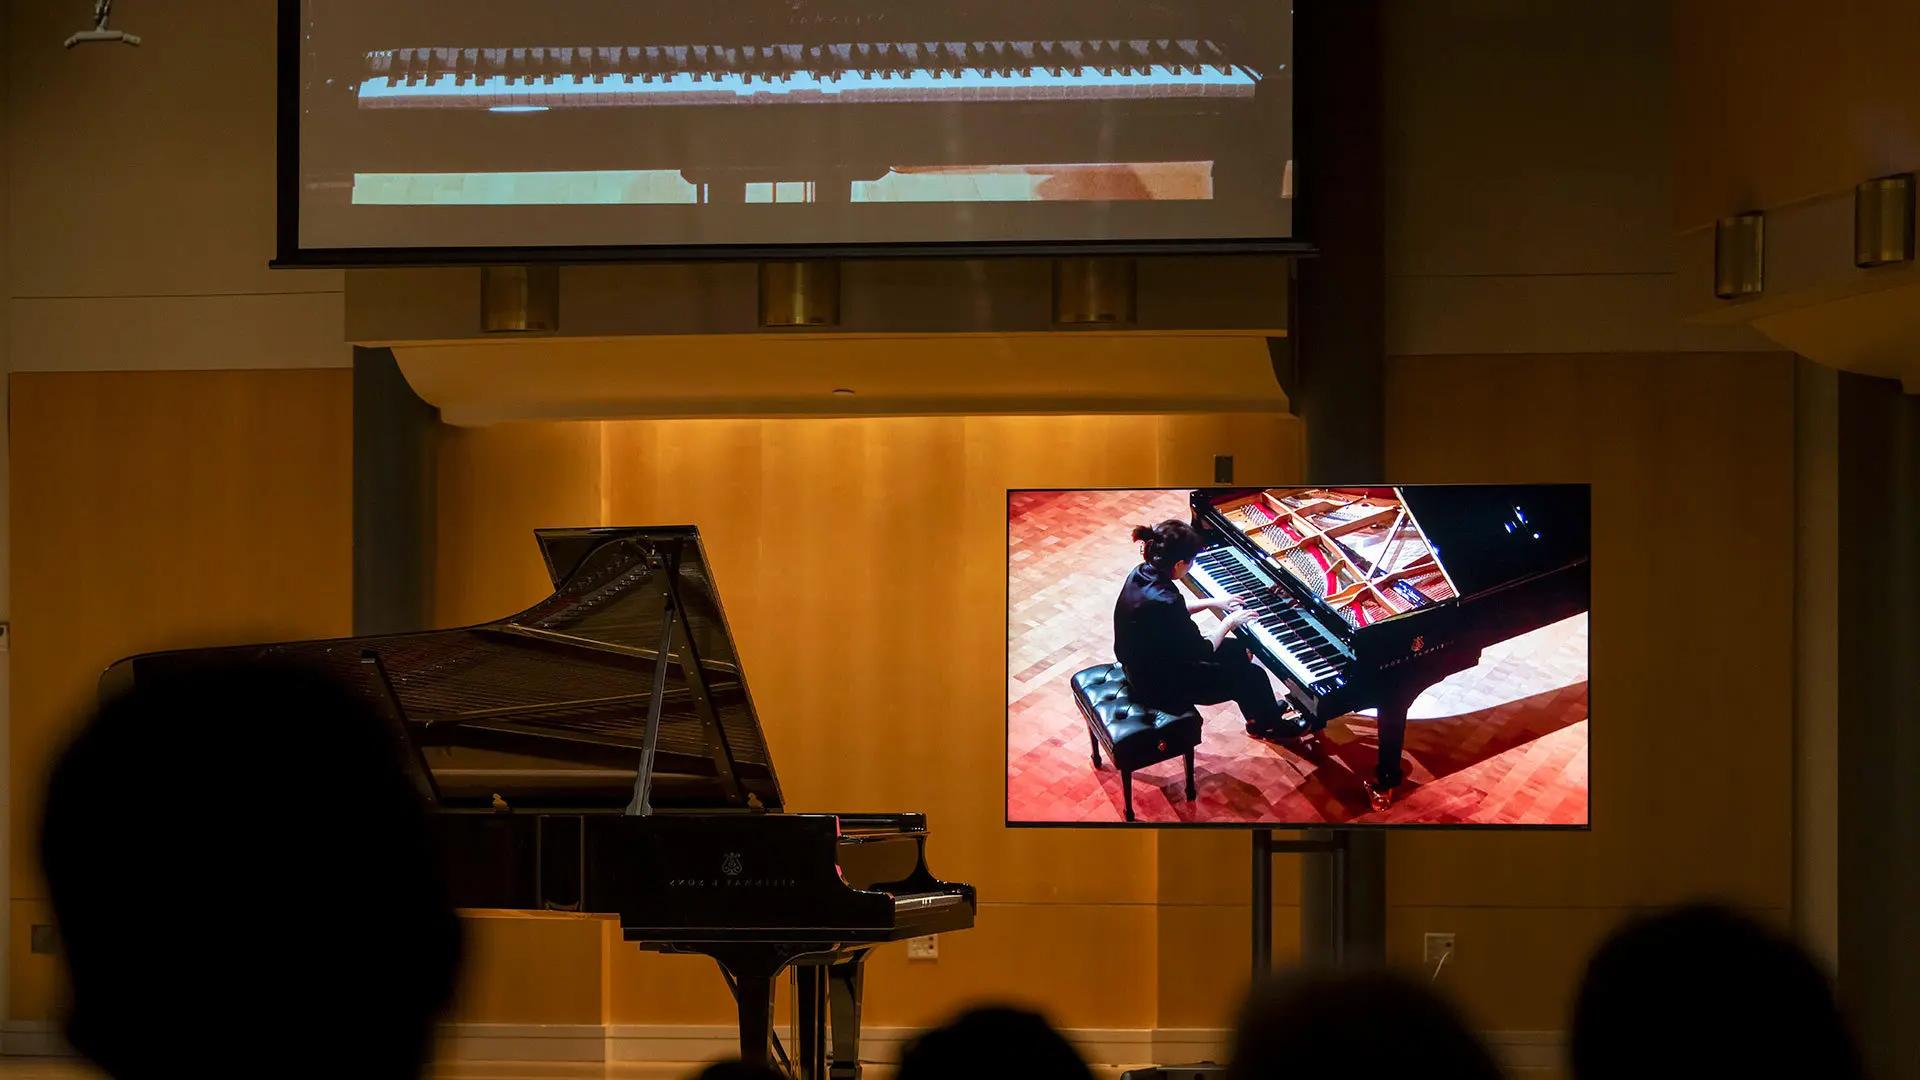 Sunday's performance by School of Music students using a high-tech piano at Steinway Hall in New York City was simulcast through an identical piano at The Clarice's Gildenhorn Recital Hall and synced with video, allowing audience members in both locations to share the experience in real time.